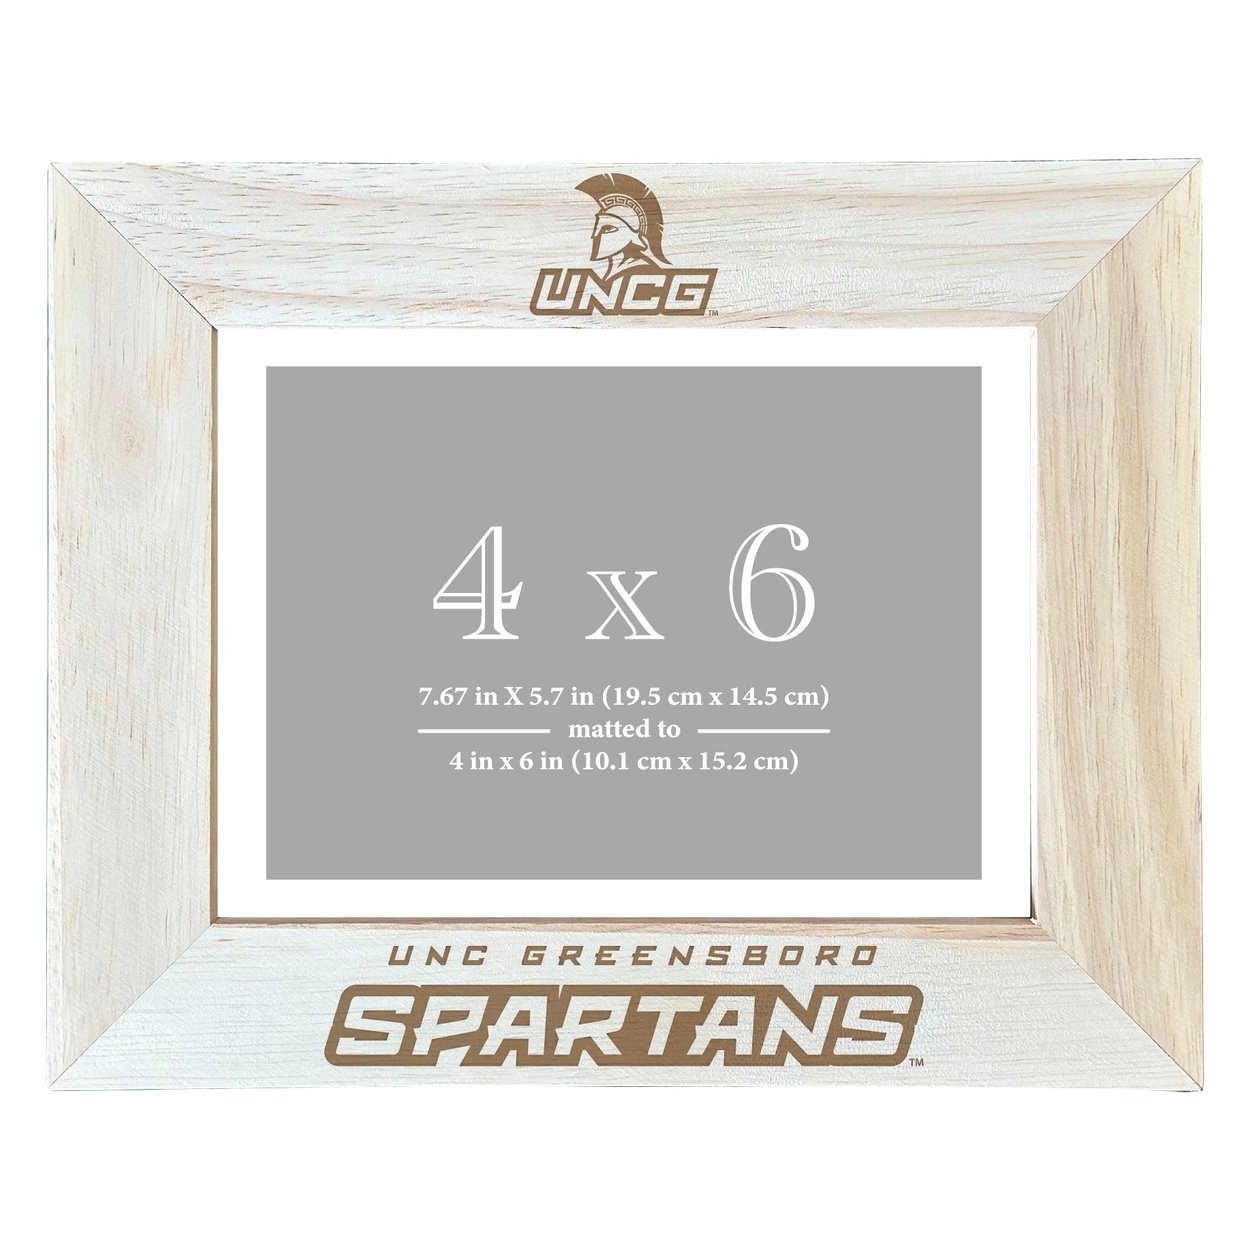 North Carolina Greensboro Spartans Wooden Photo Frame Matted To 4 X 6 Inch - Etched